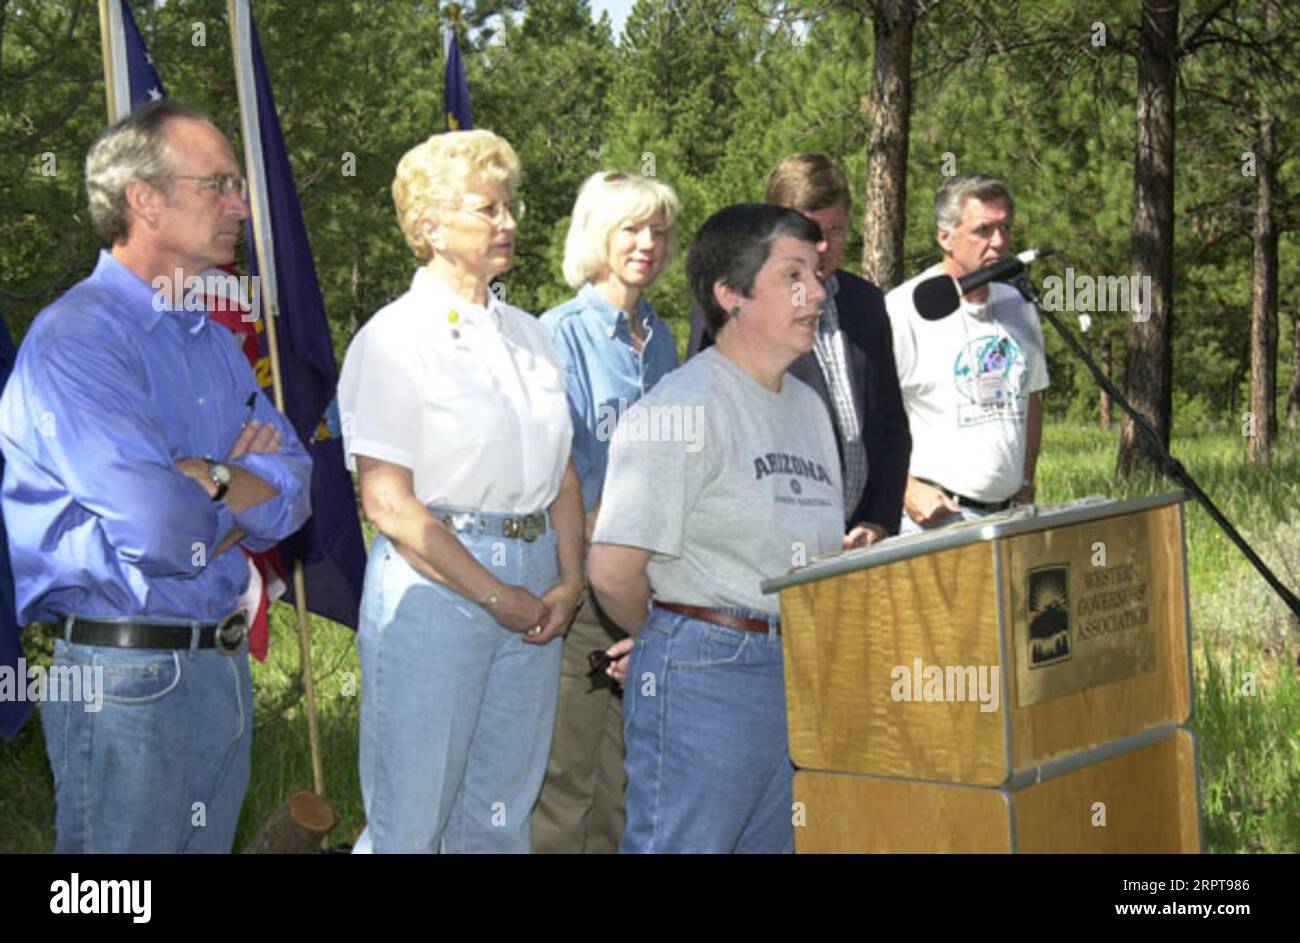 Speech by Arizona Governor Janet Napolitano, with Idaho Governor Dirk Kempthorne, Montana Governor Judy Martz, Secretary Gale Norton, Wyoming Governor Dave Freudenthal, Forest Service Chief Dale Bosworth, behind left to right, at Western Governors' Association Forest Summit, Missoula, Montana Stock Photo